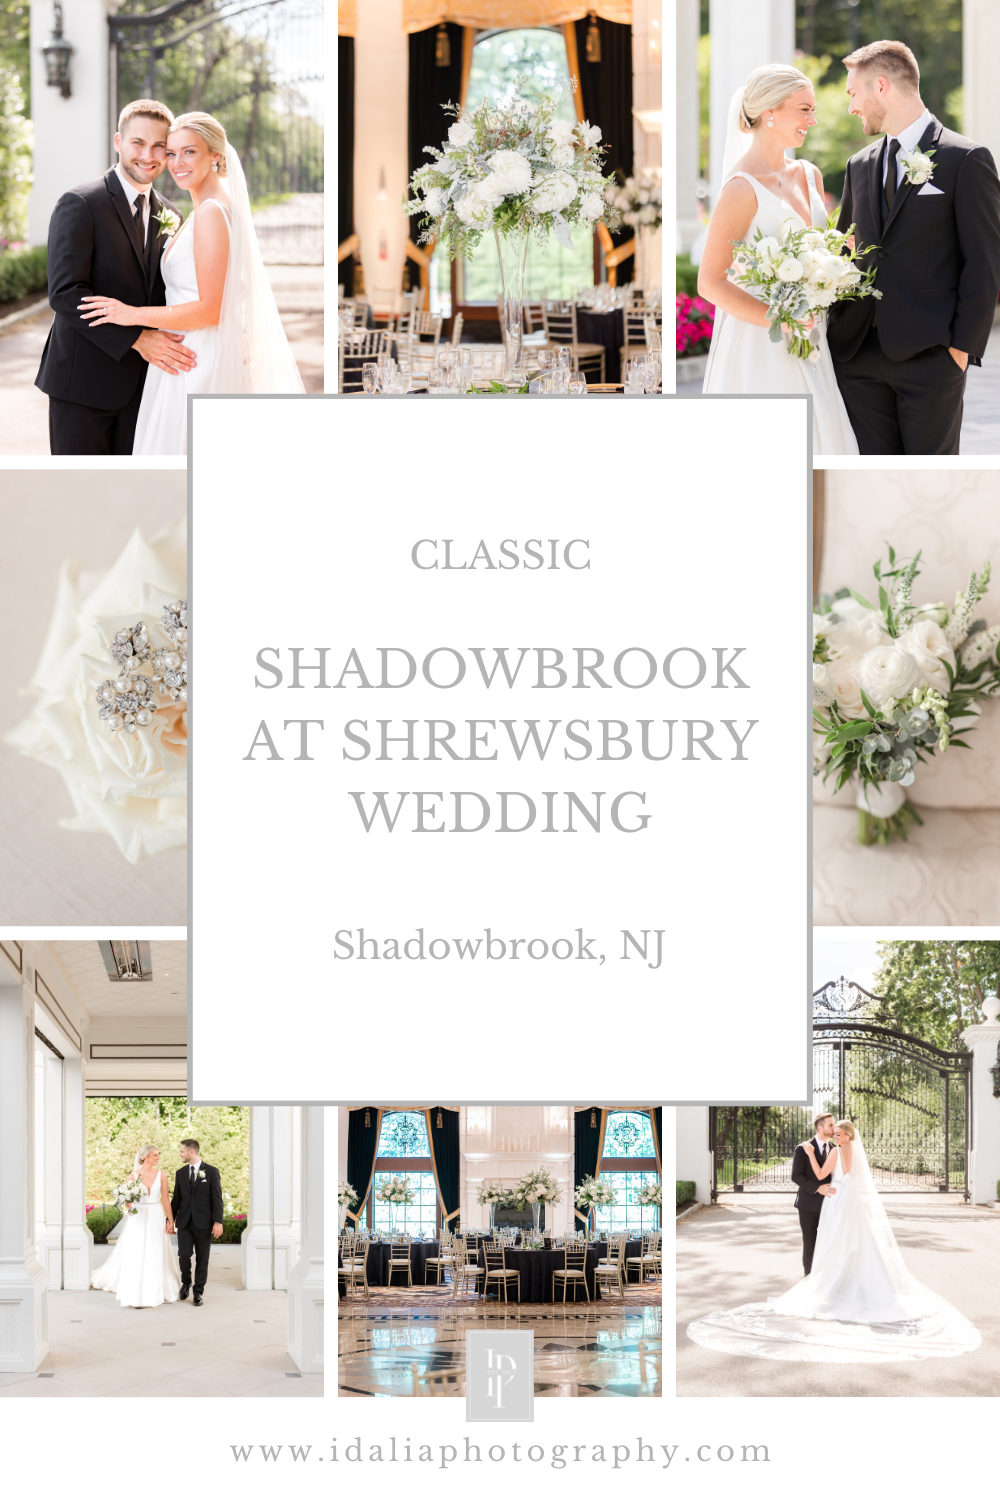 classic Shadowbrook at Shrewsbury wedding in New Jersey photographed by Idalia Photography